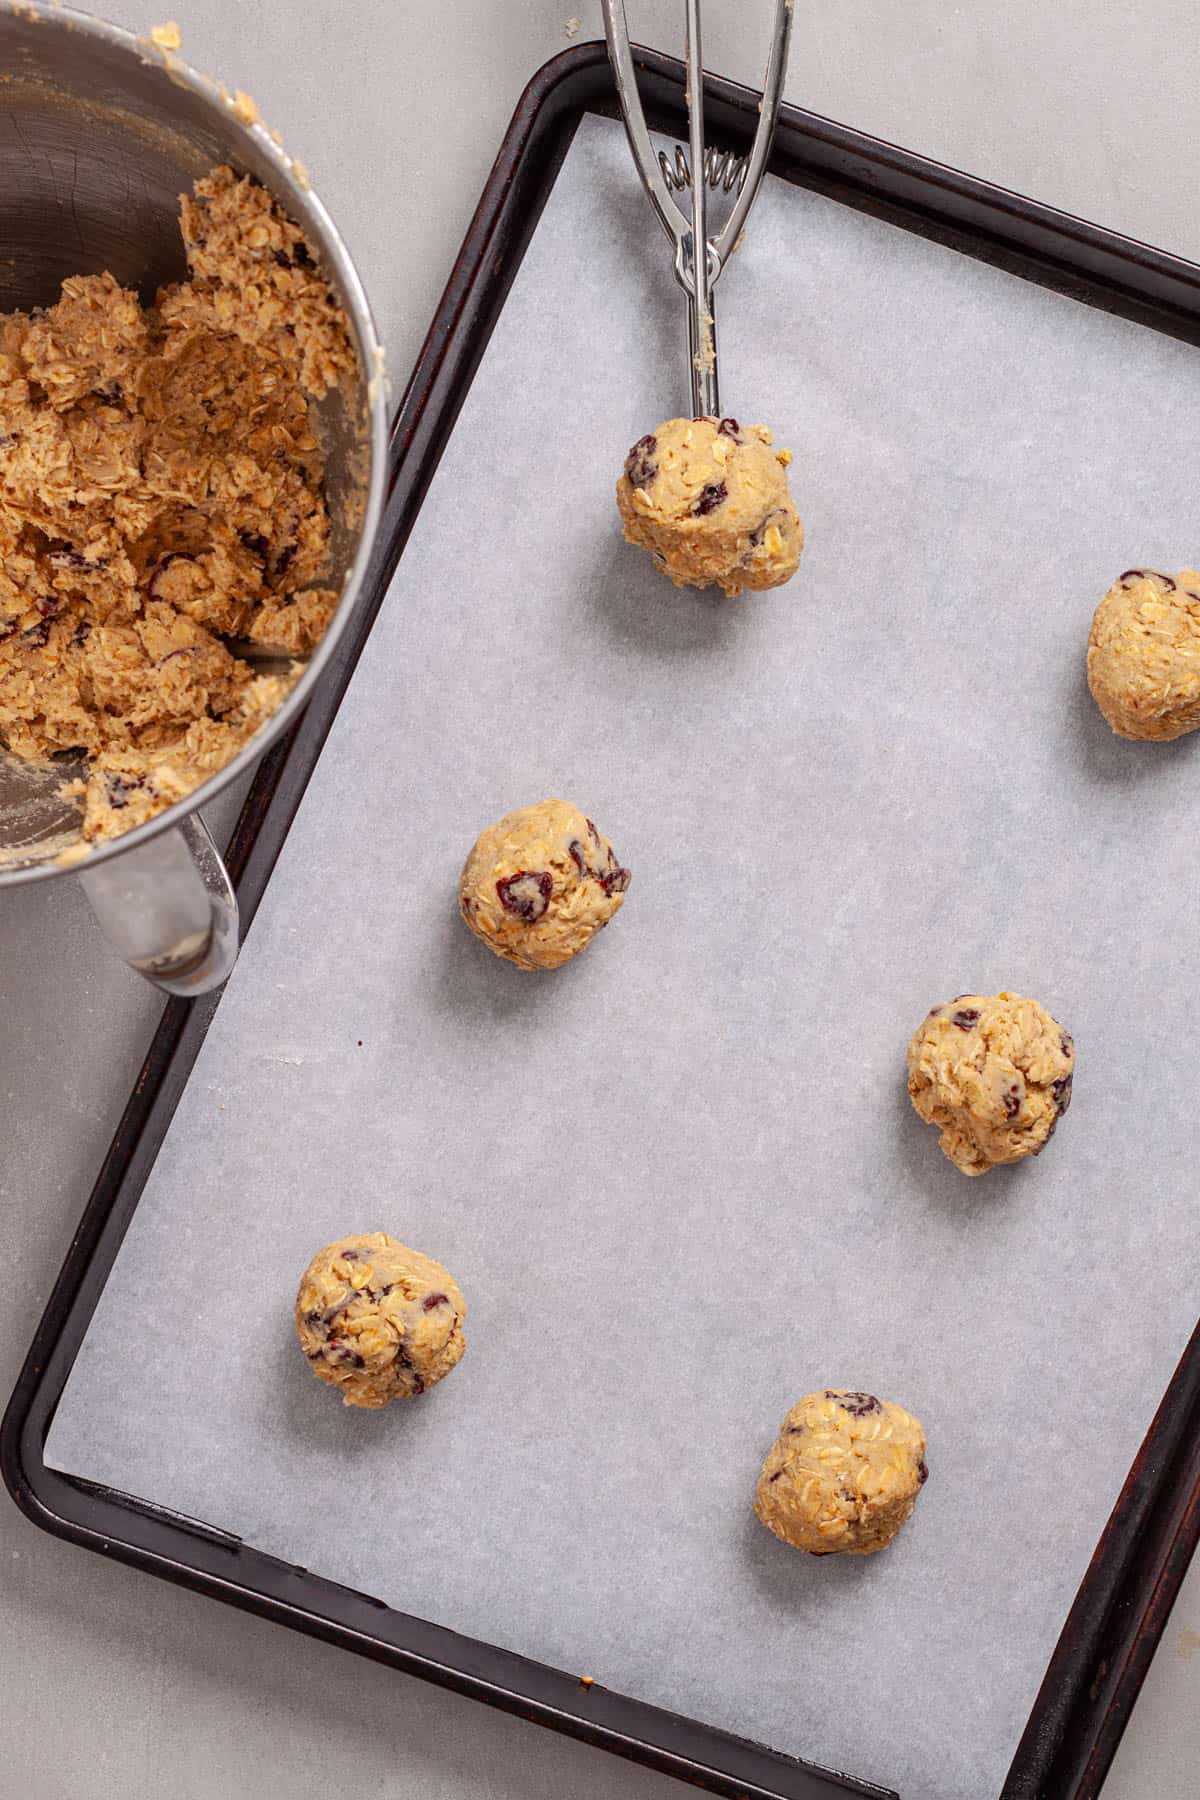 Cherry oatmeal cookie batter portioned out on a parchment-lined baking sheet.